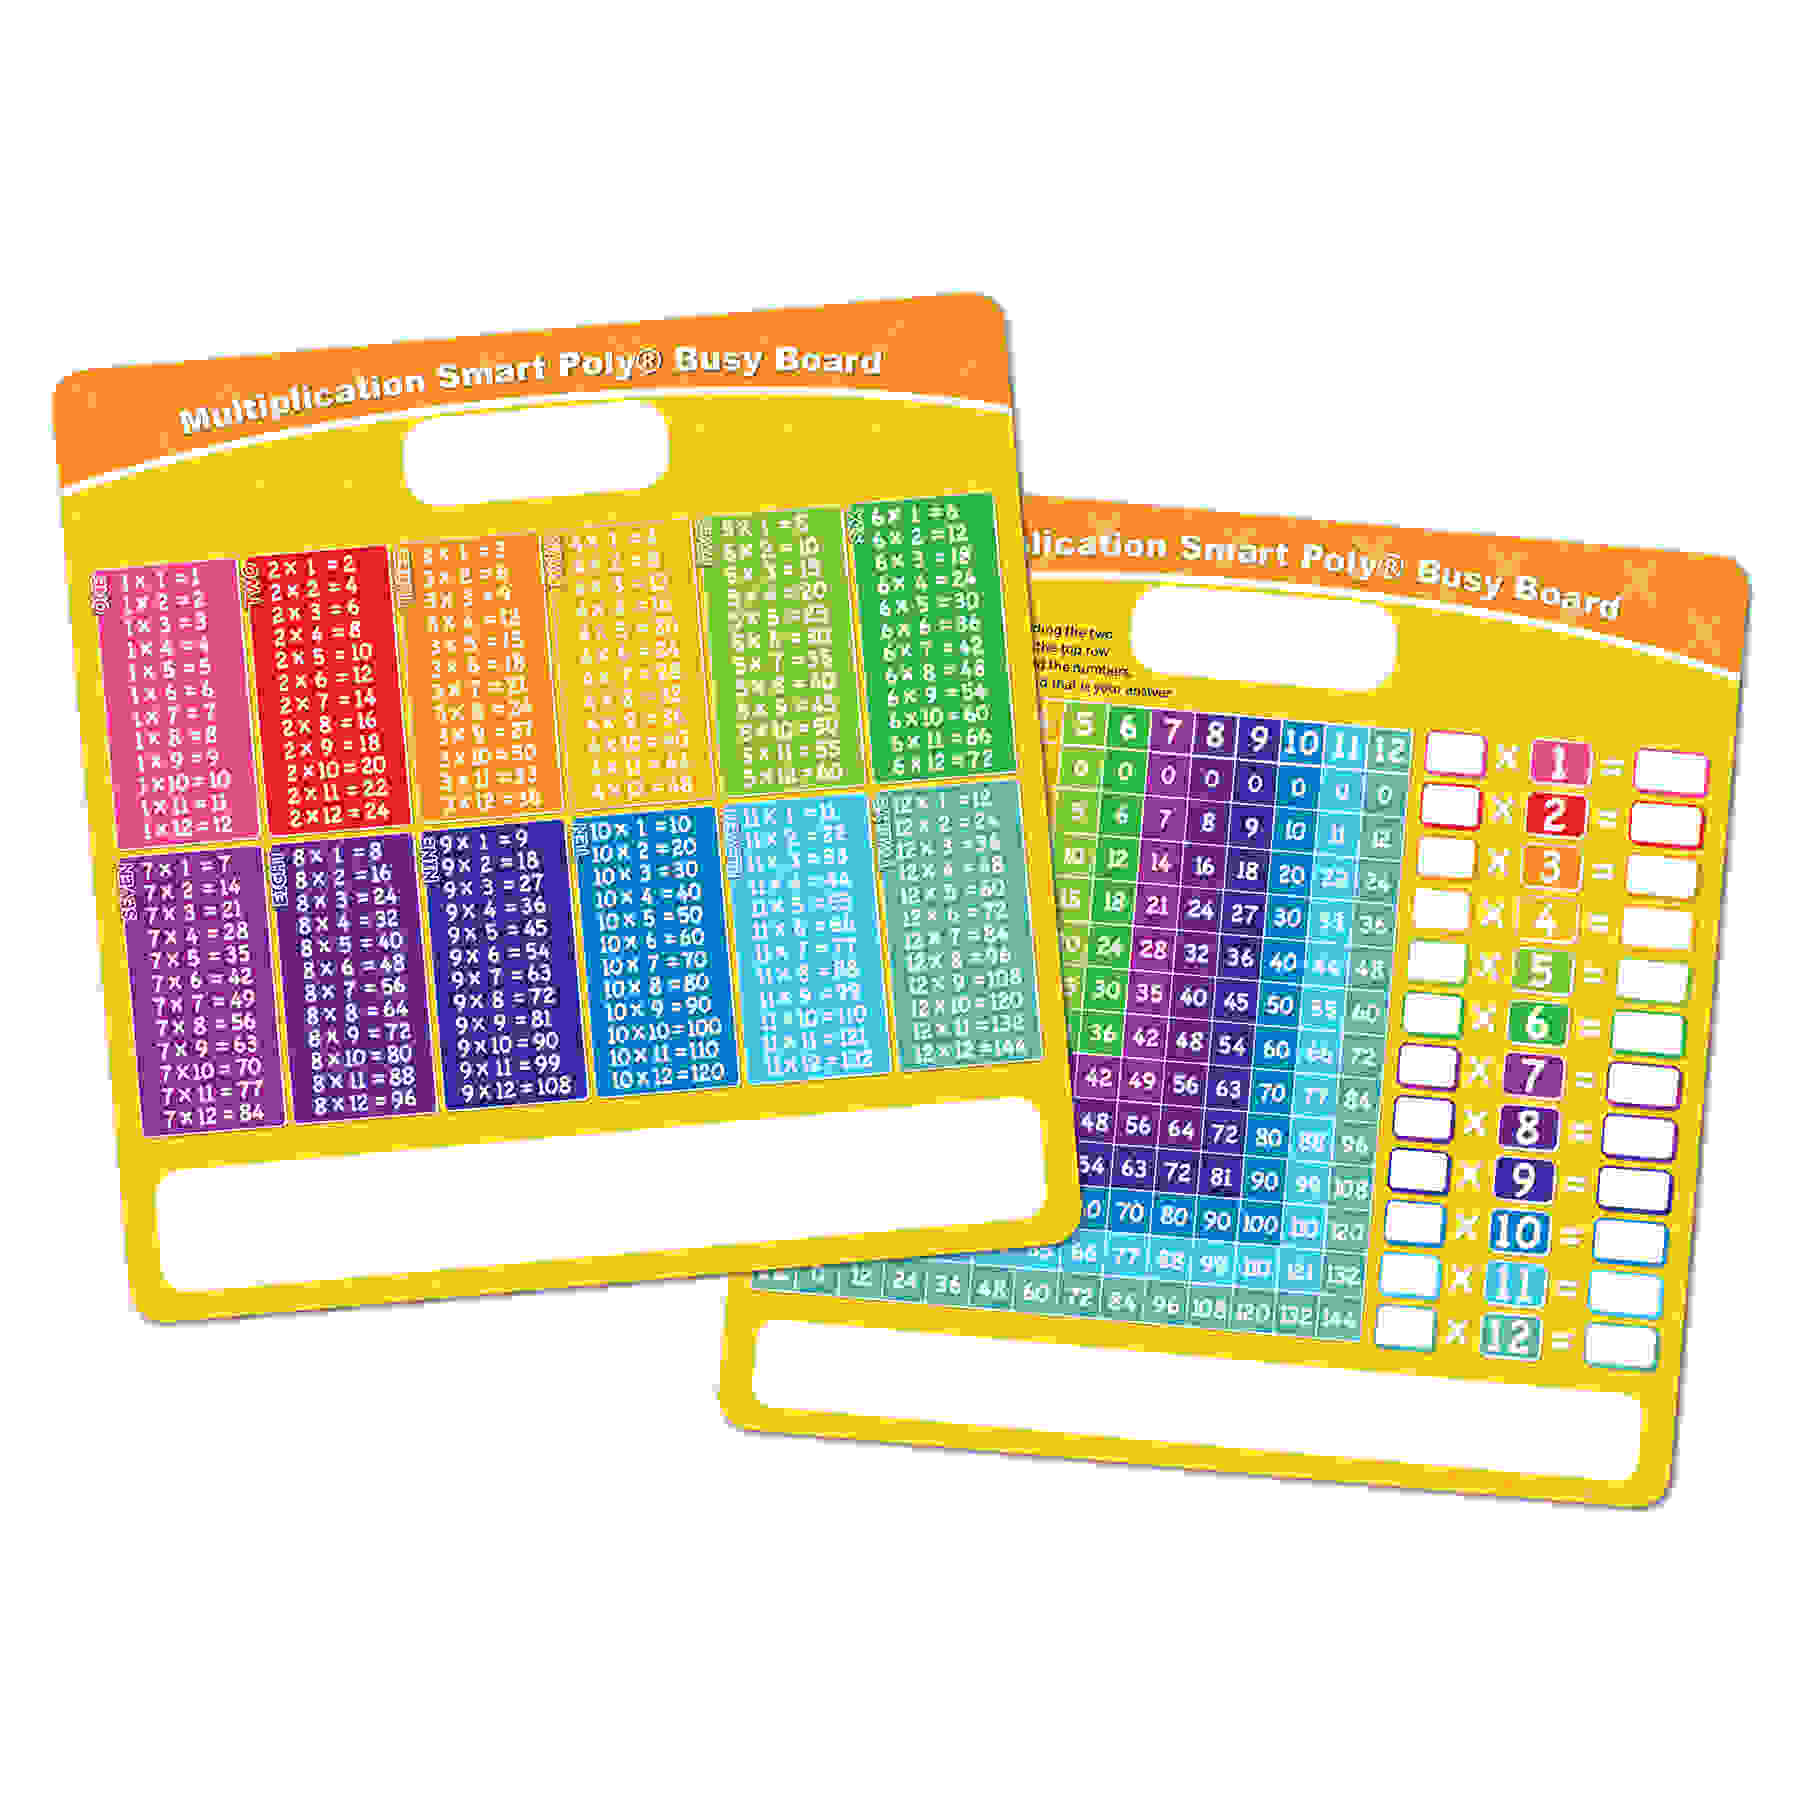 Smart Poly Educational Activity Busy Board, Dry Erase with Marker, 10-3/4" x 10-3/4", Multiplication